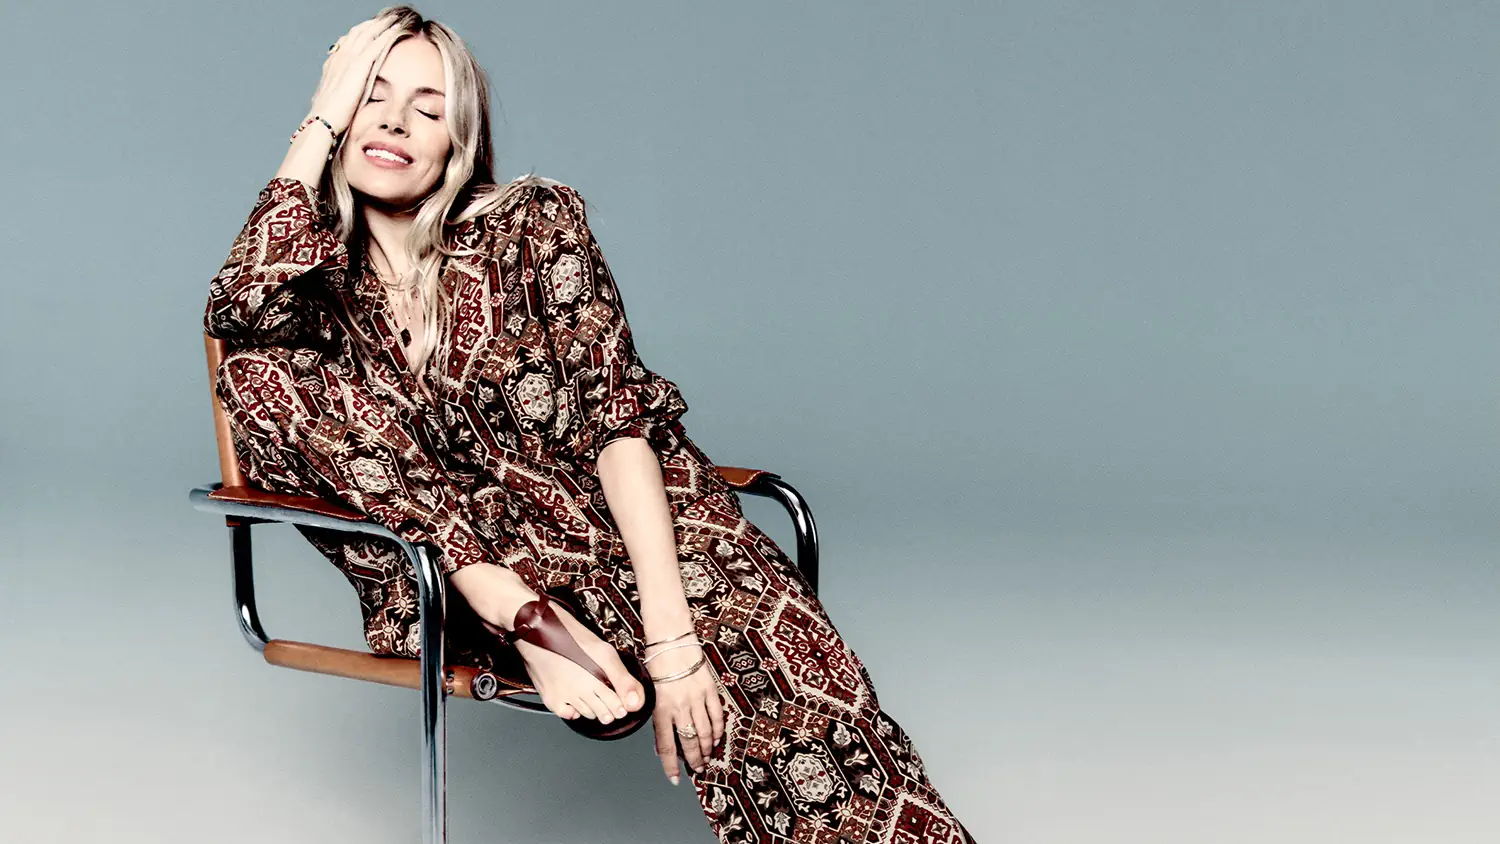 Sienna Miller's boho chic meets M&S in stunning collaboration